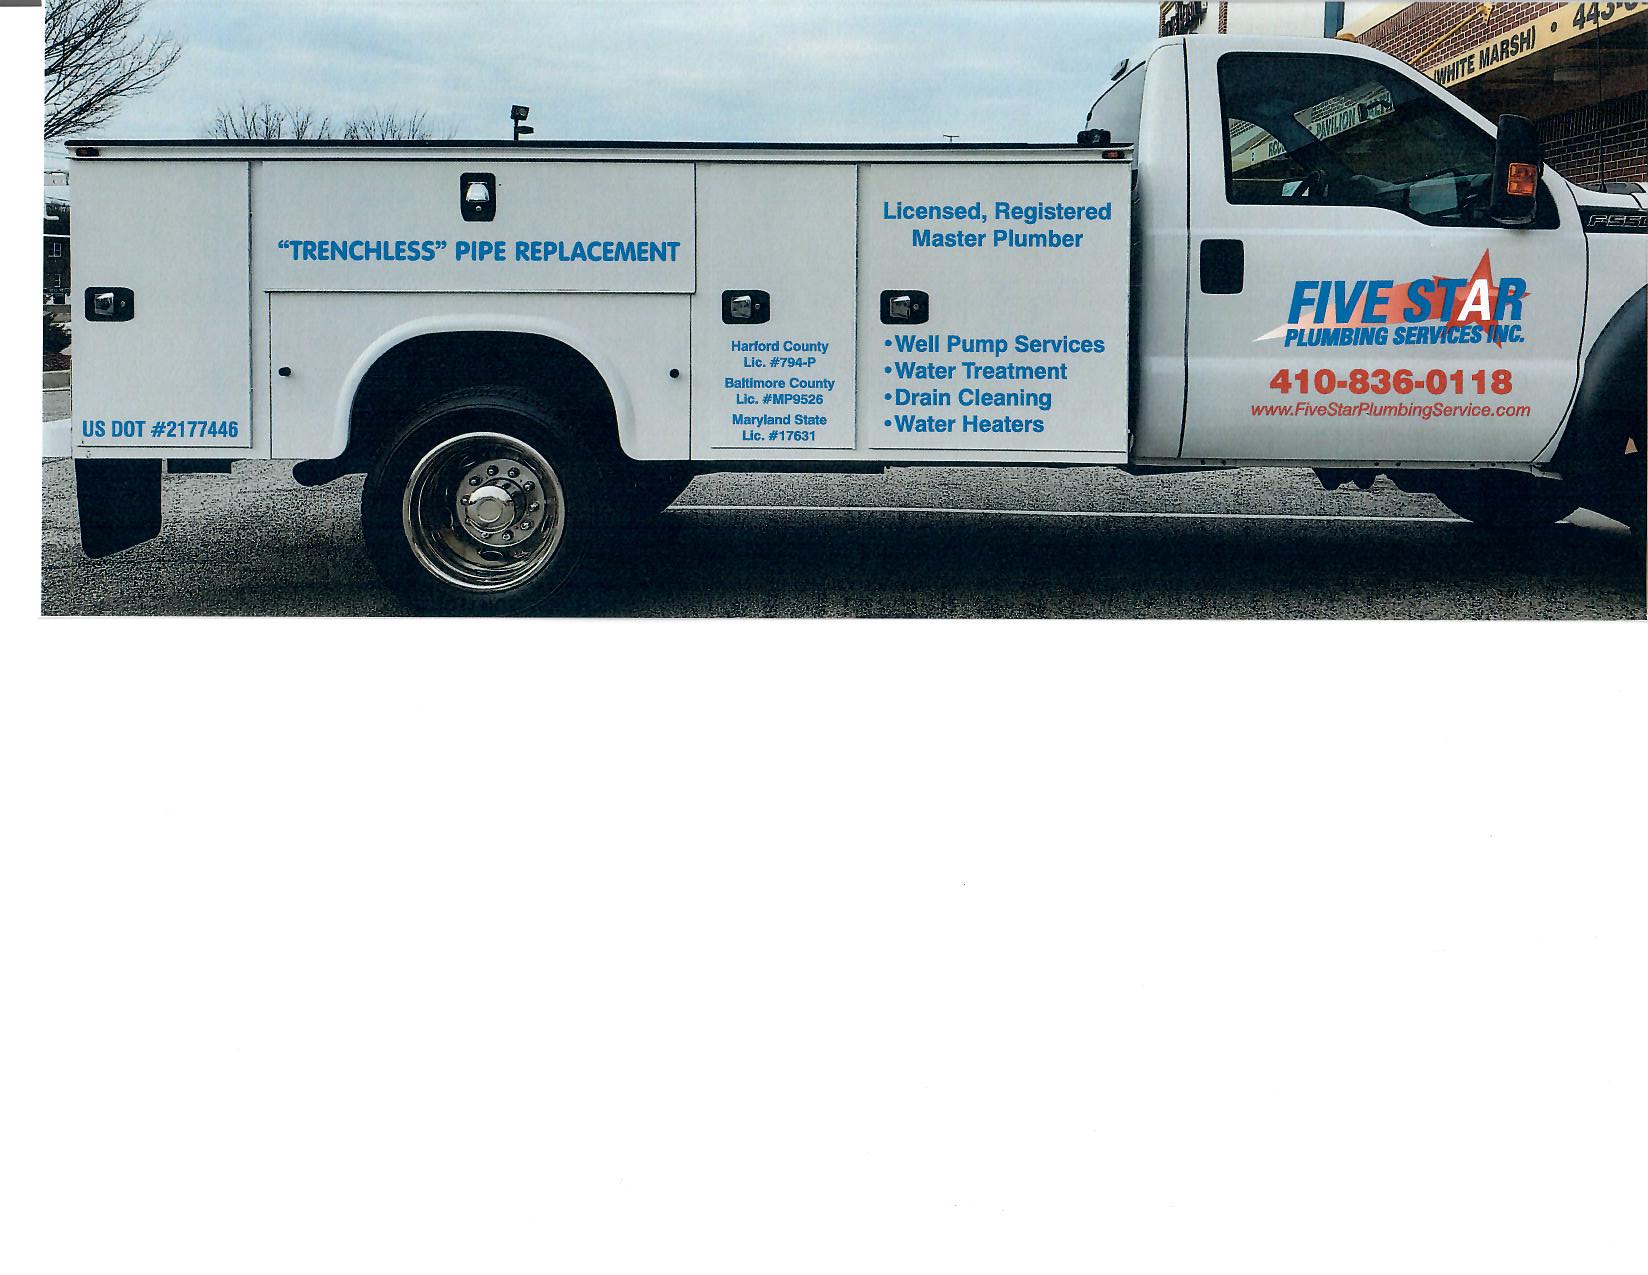 Five Star Plumbing Services Inc 2018 Mountain Rd, Joppatowne Maryland 21085